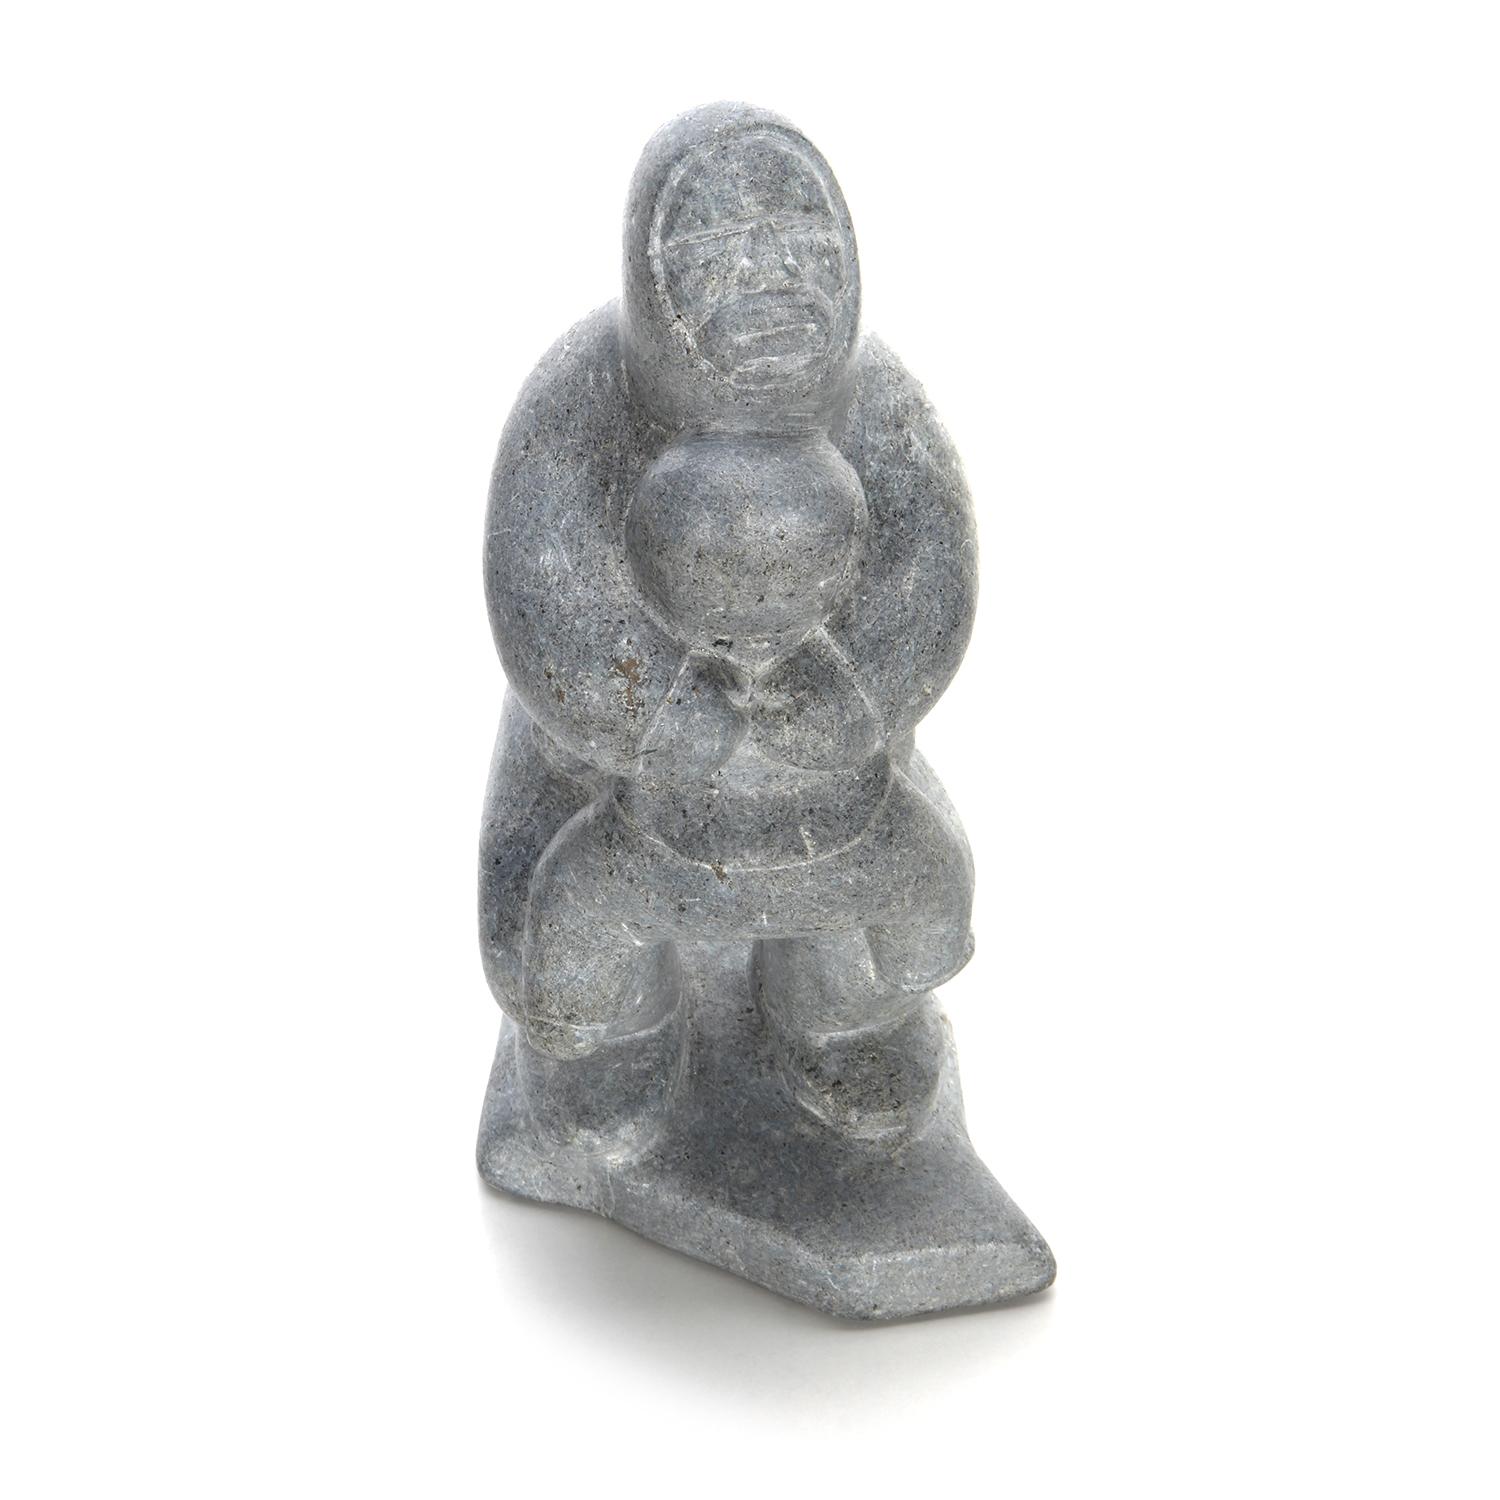 Eskimo Soapstone figurine from 1981 - beautiful vintage Inuit soapstone carving in very good vintage condition.

A charming soapstone figuring depicting a man carrying his young child. The extend of details in this figurine is truly amazing and it